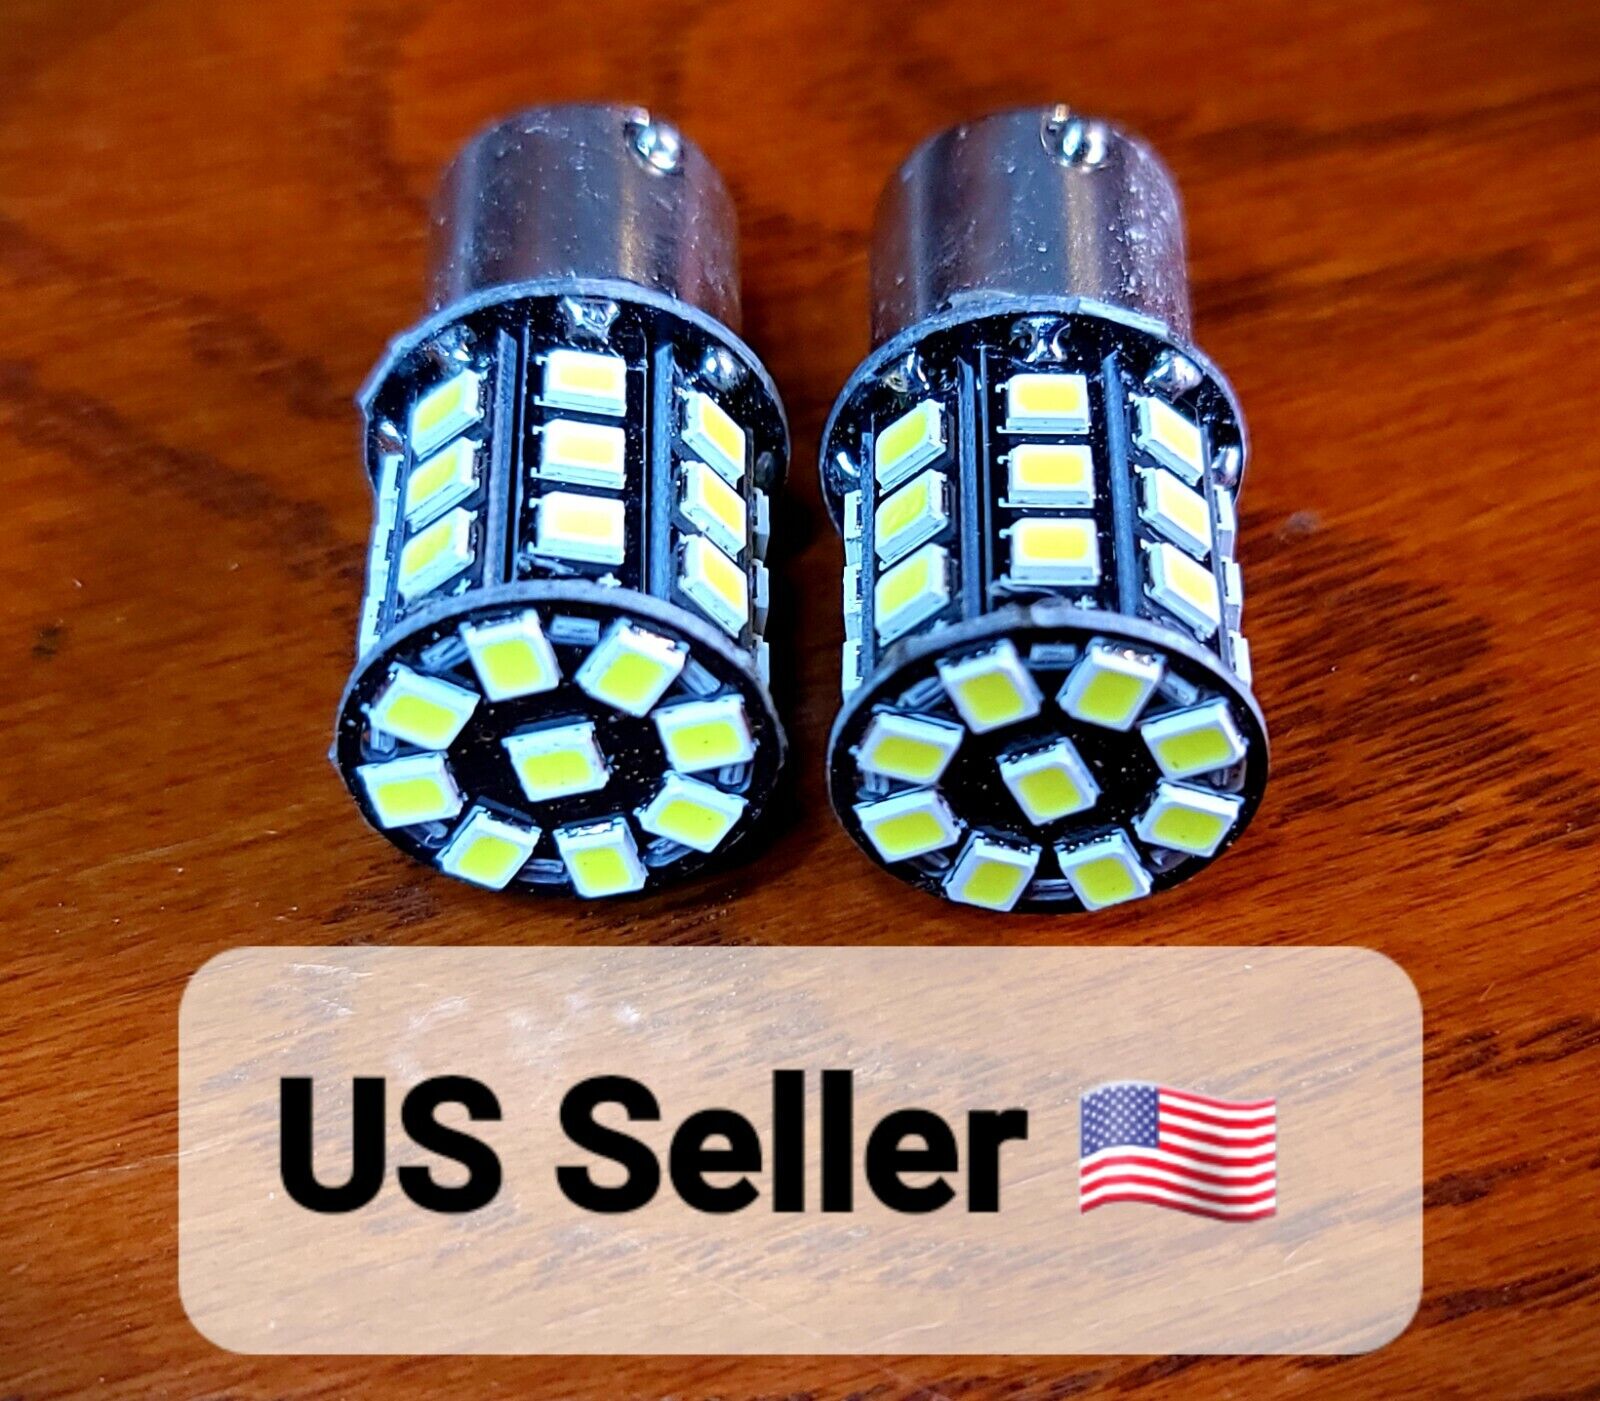 2 Super Bright LED light bulbs for Steiner 430; Farmall Jacobsen Chief Ford Case